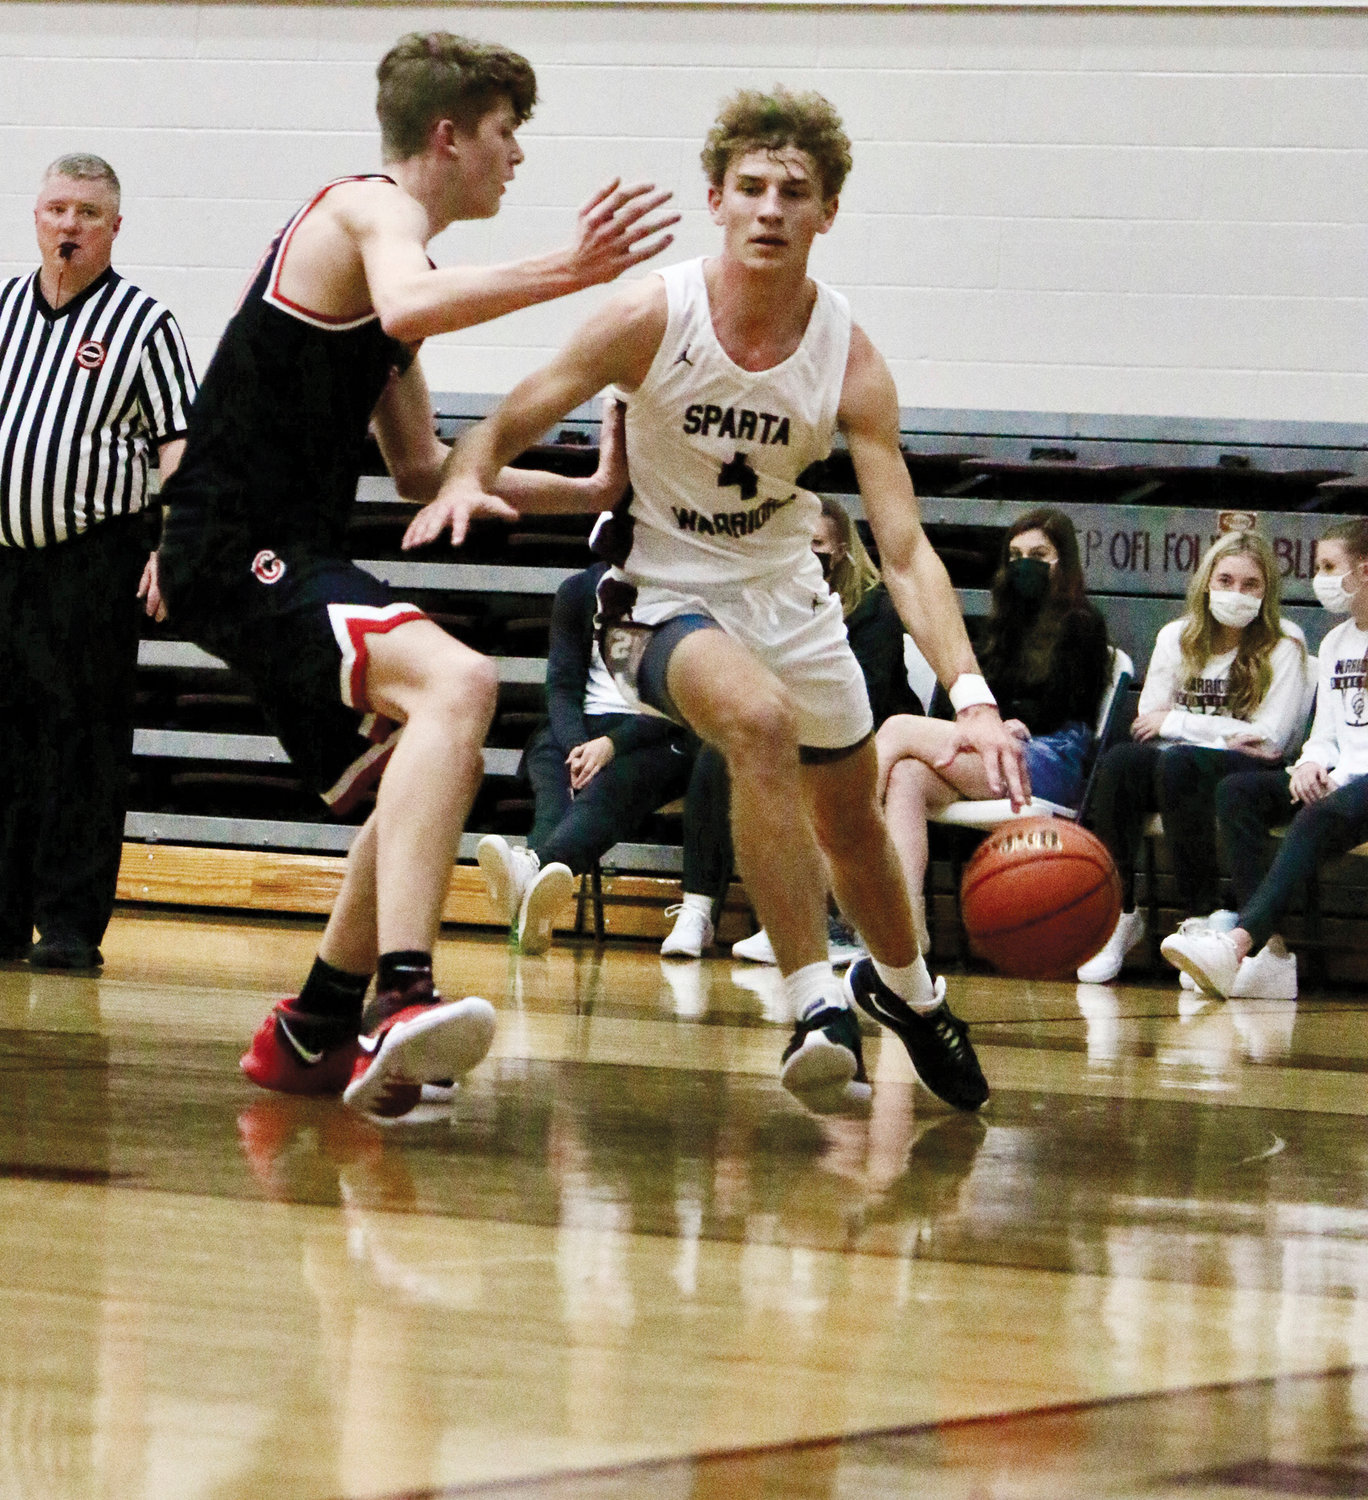 Tanner Paul drives to the basket in Friday night’s game against Coffee County. Paul finished with eight points, seven assists, and 10 rebounds.